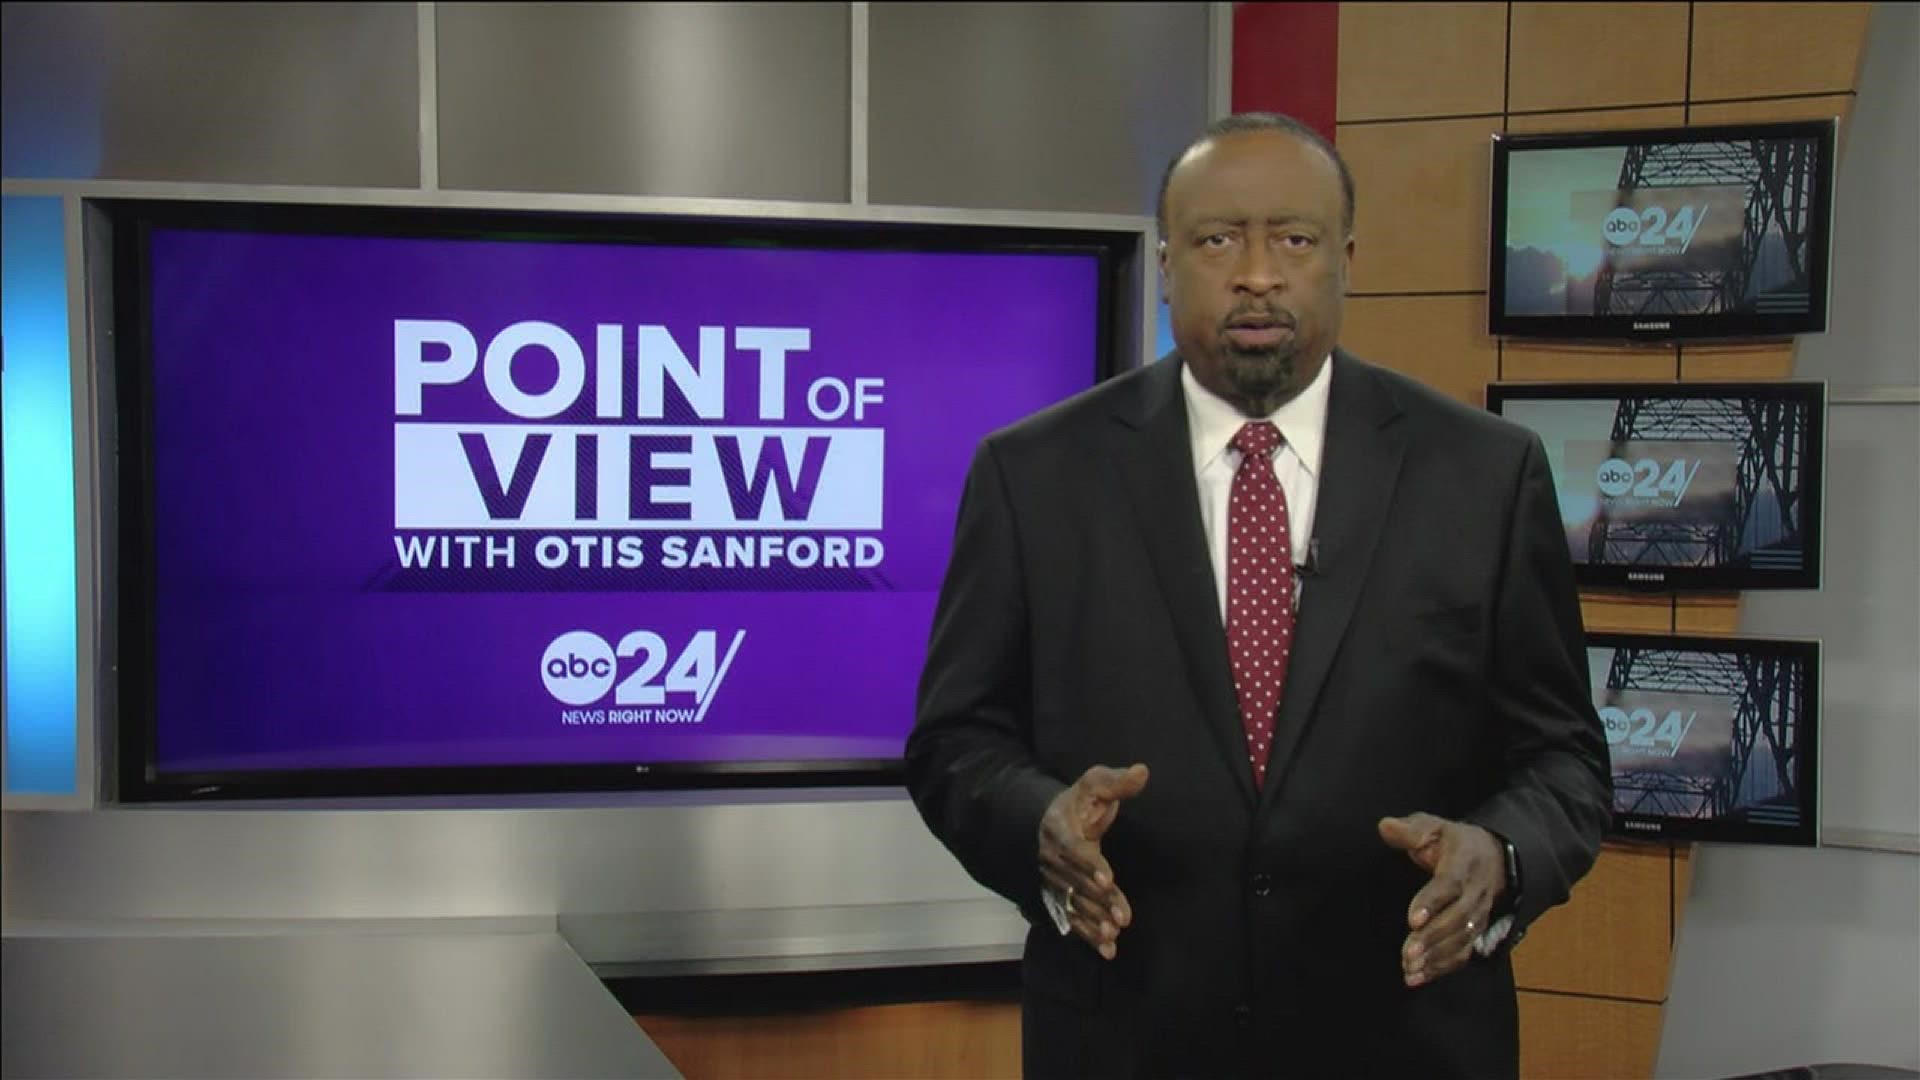 ABC 24 political analyst and commentator Otis Sanford shared his point of view on an East Tennessee school district banning the Holocaust-themed book ‘Maus’.